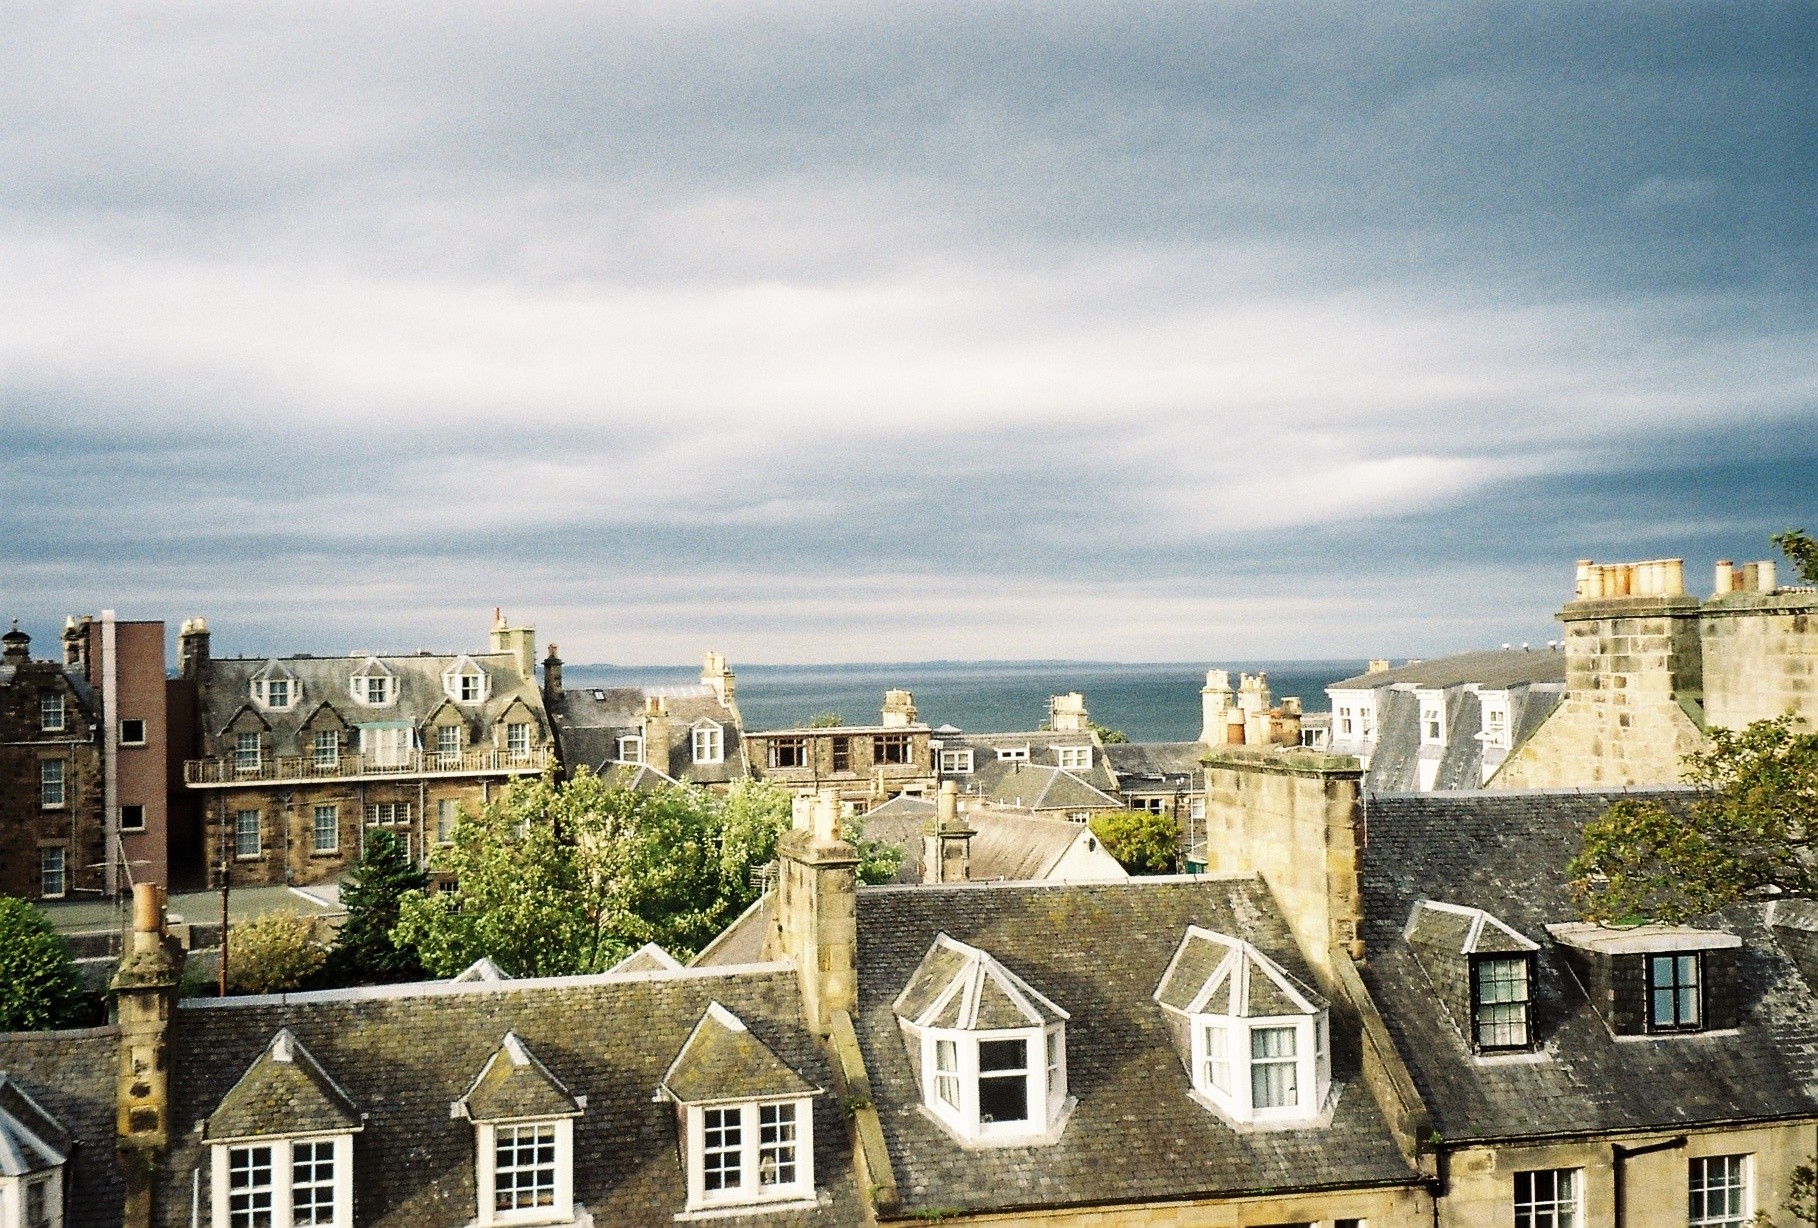 A view from my window at St Andrews